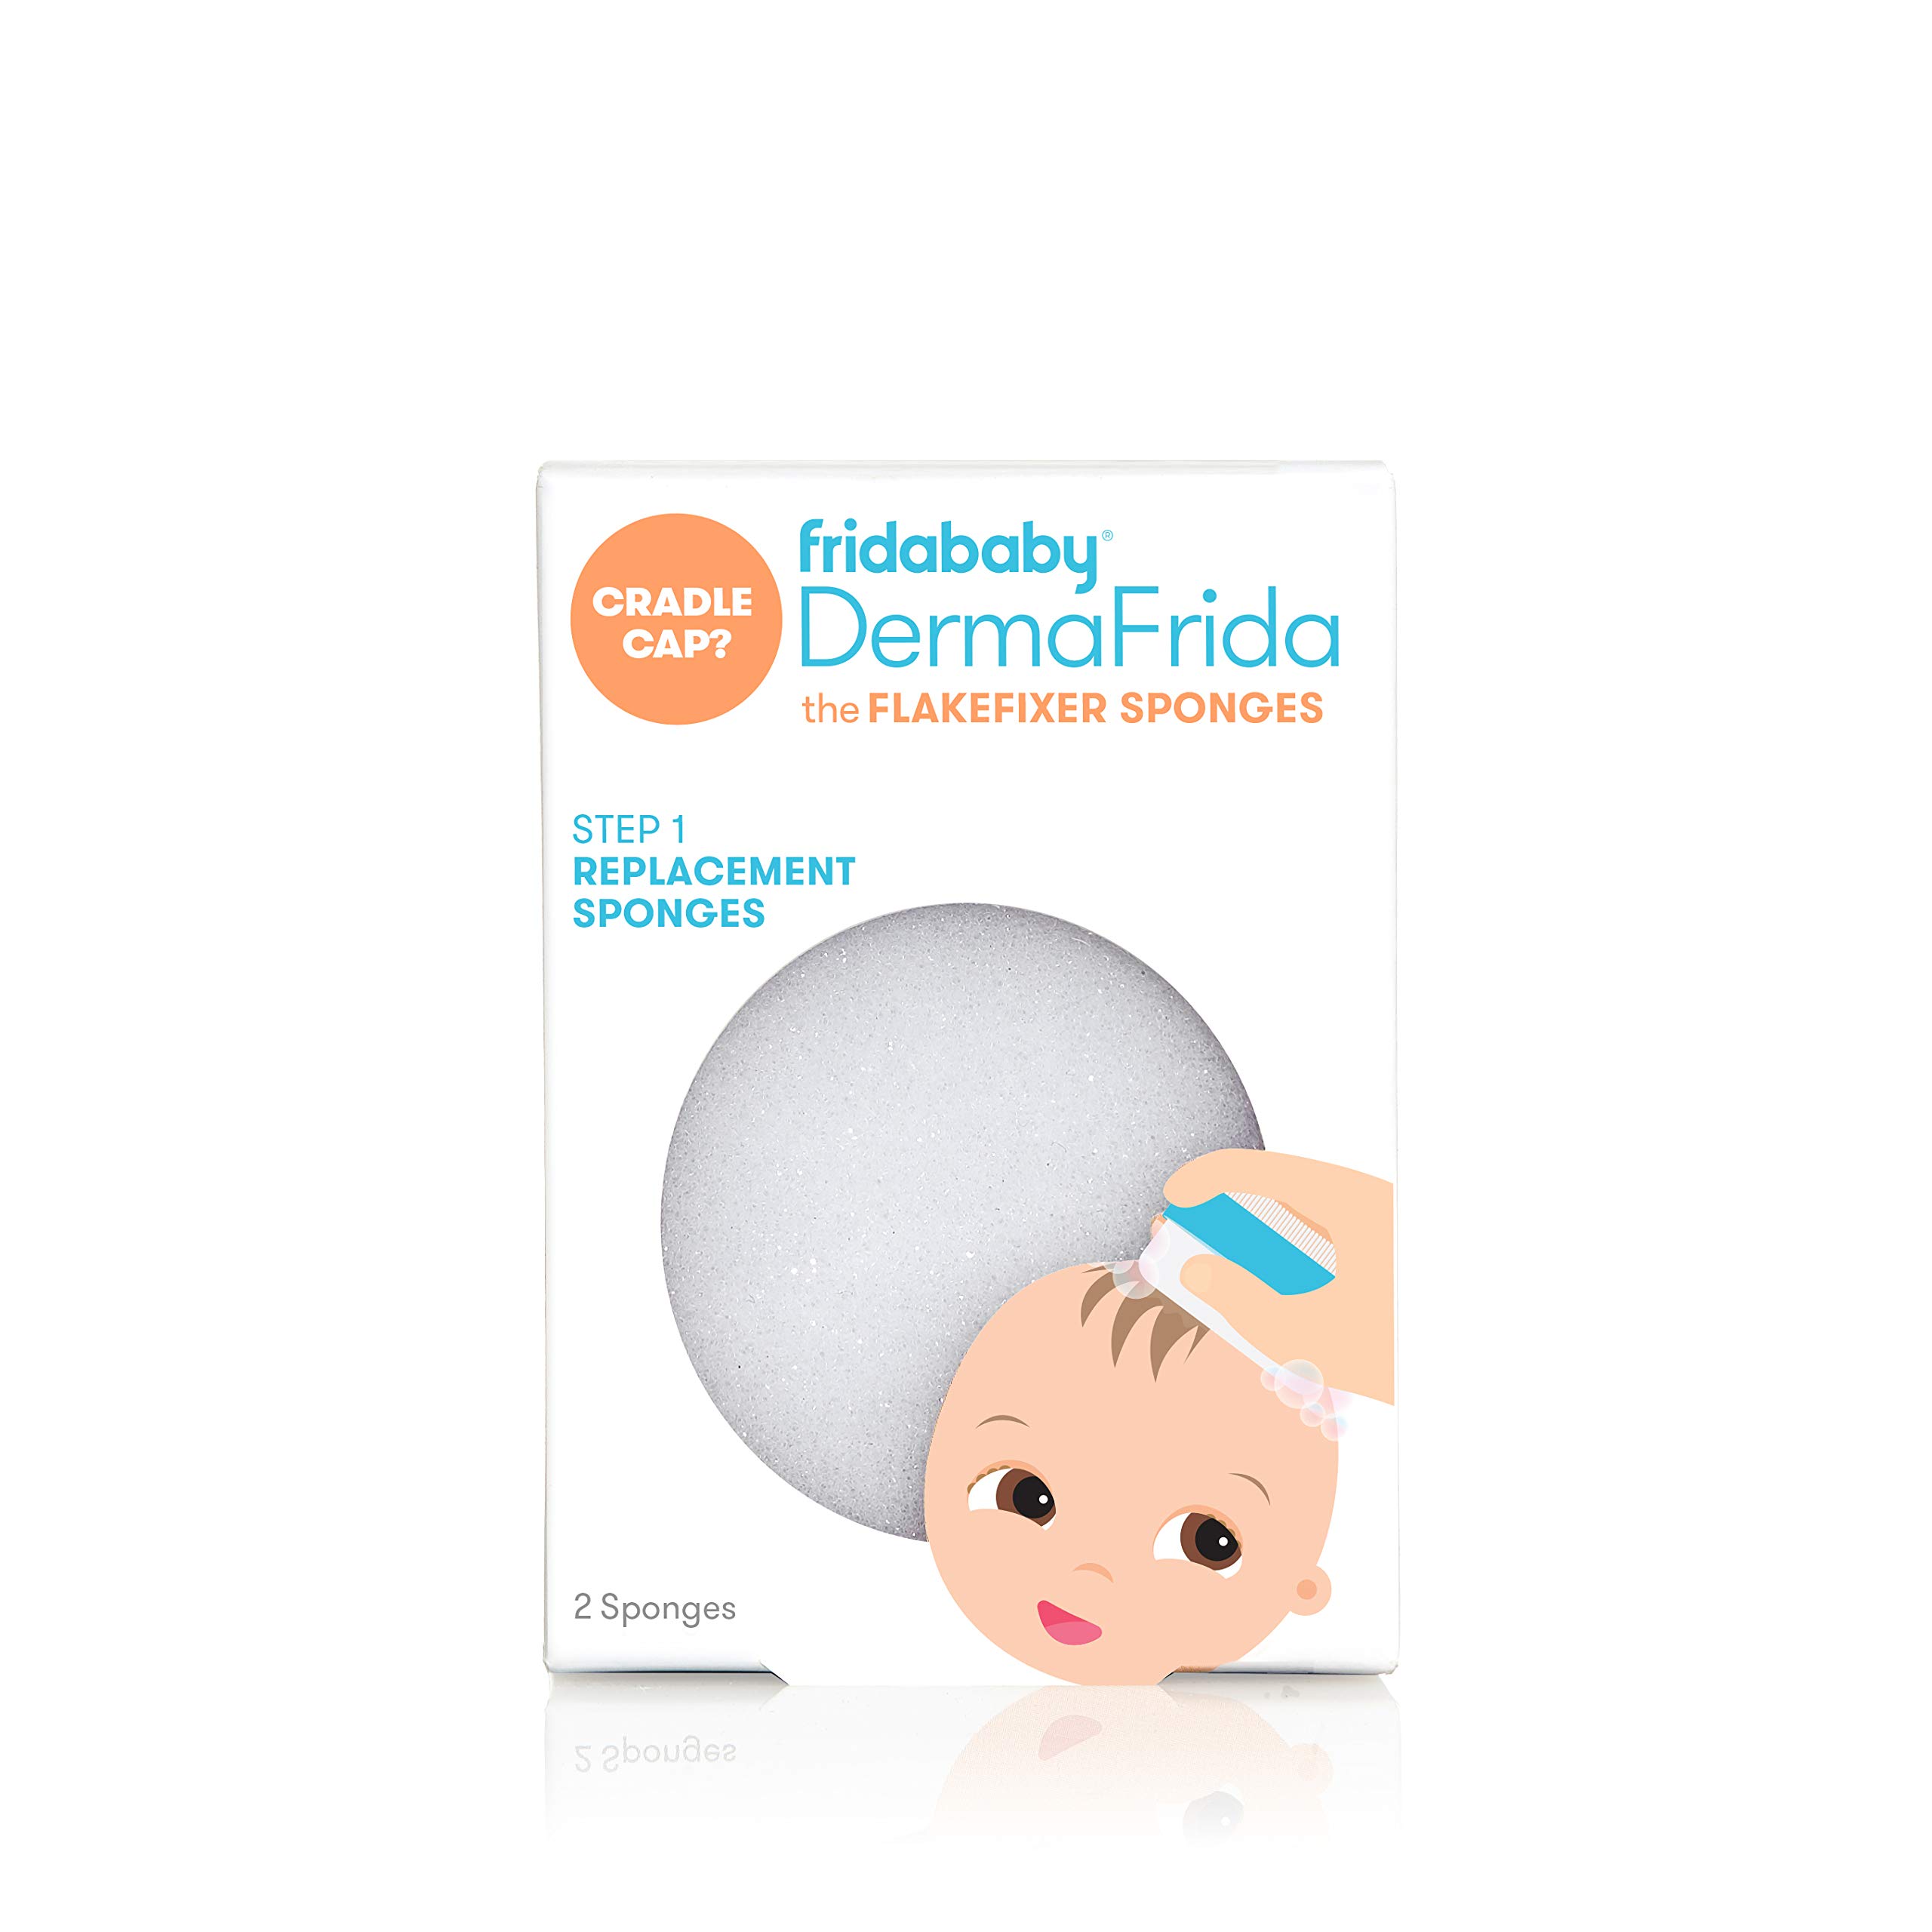 Frida Baby Replacement Sponges for The 3-Step Cradle Cap System by Dermafrida The Flakefixer 2 Pack of Soft Sponges Work with The Flakefixer System(Sold Separately)